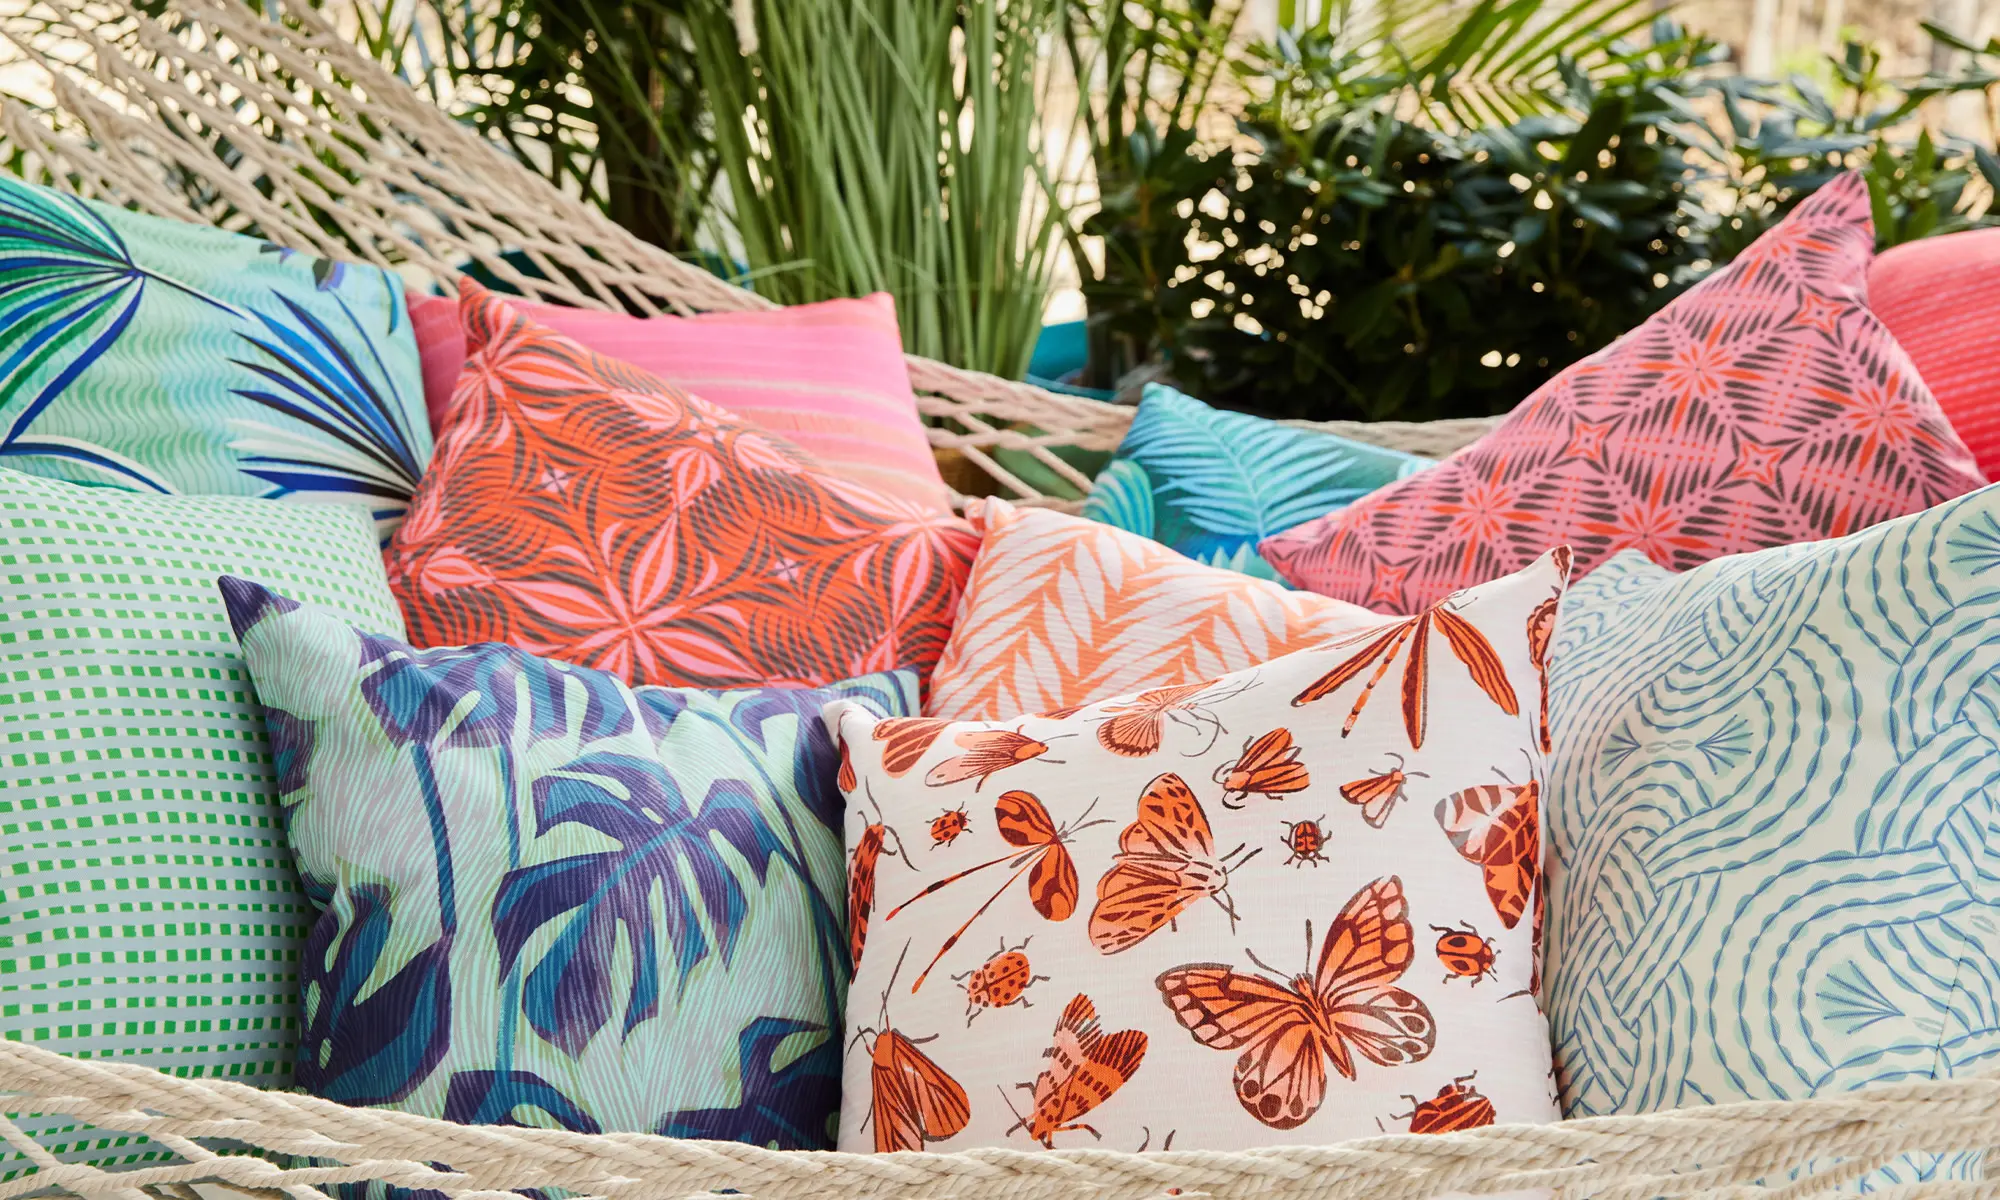 Hammock covered in summery pink and blue outdoor throw pillows.